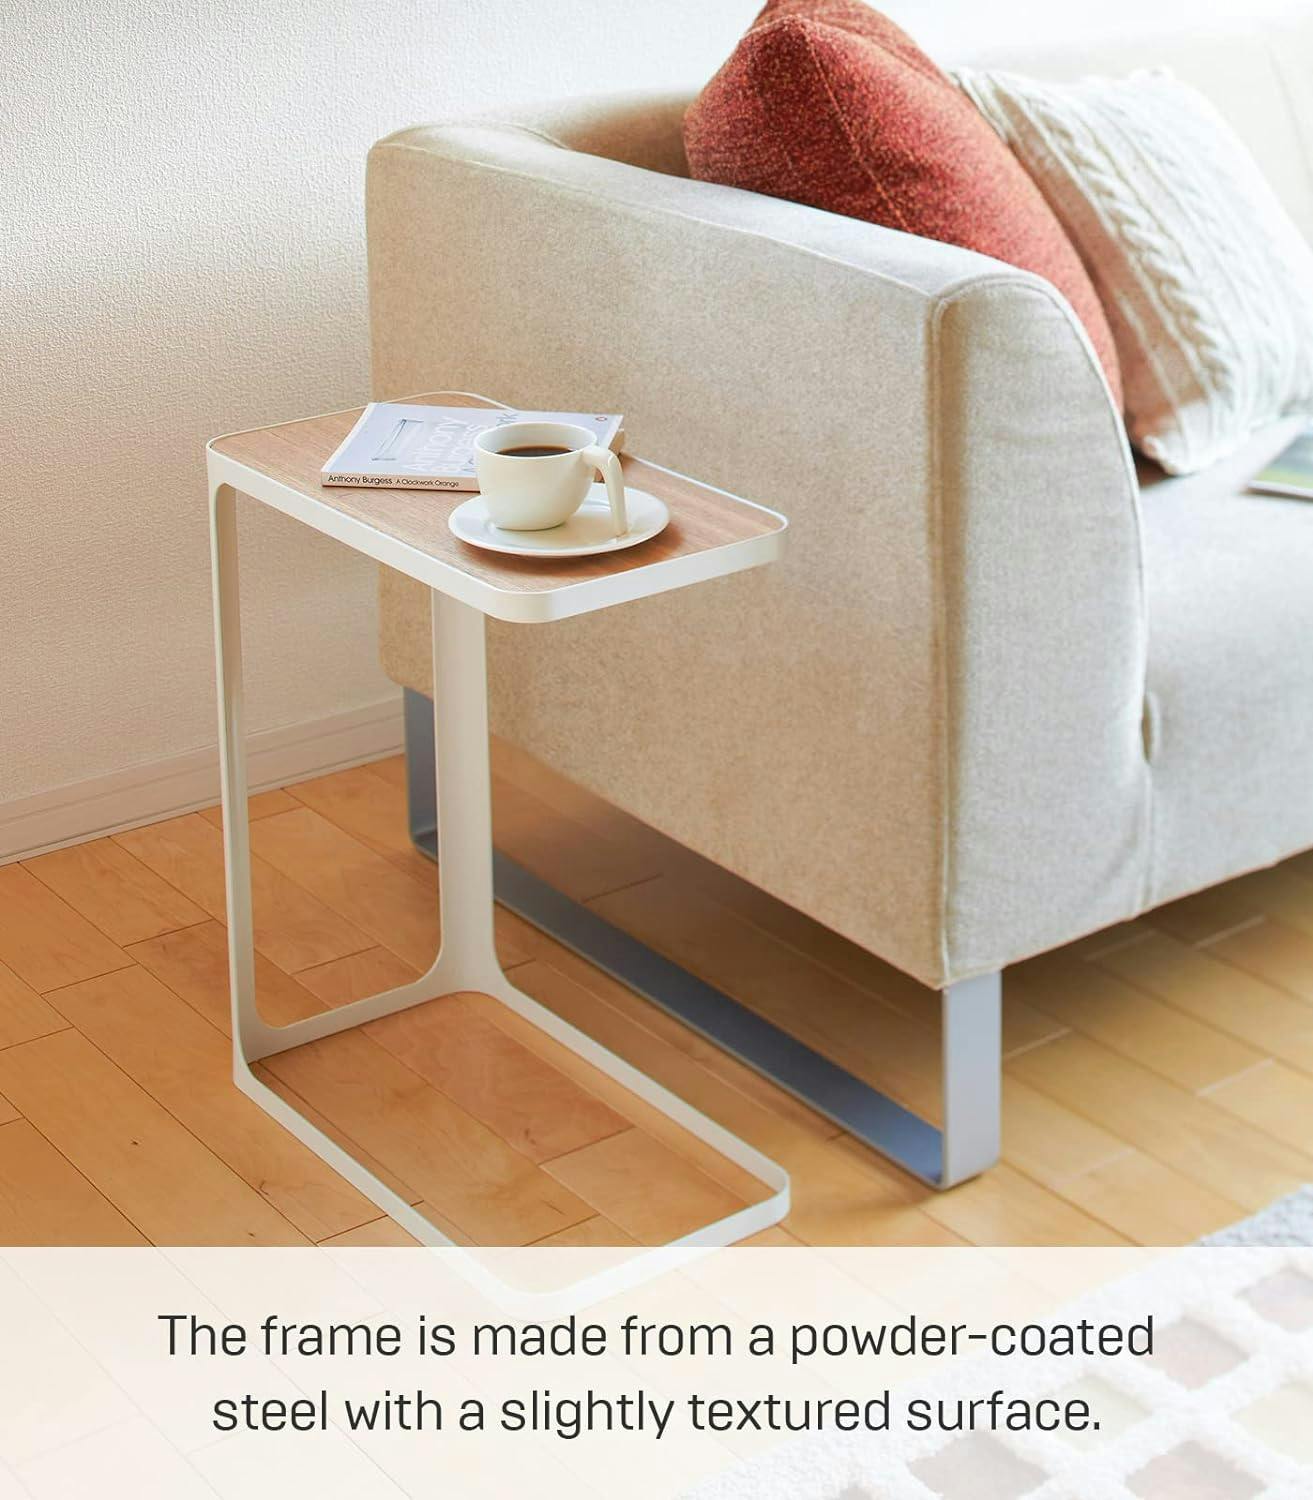 Minimalist Metal and Wood C-Shaped Side Table - Compact and Versatile